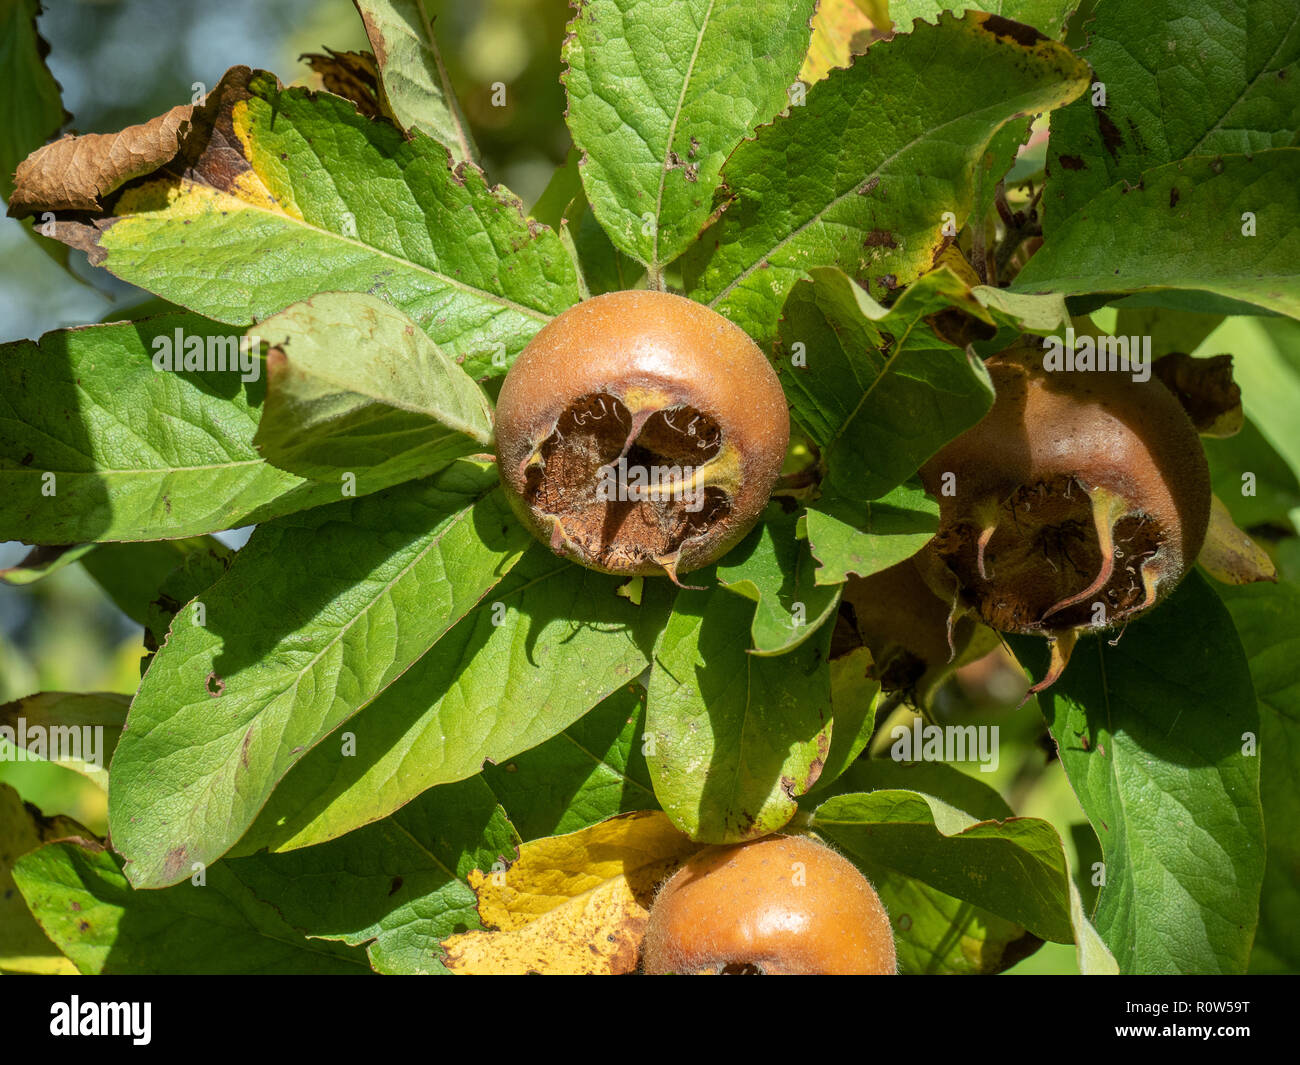 A ripe medlar (Mespilus germanica) fruit against a backgroud of leaves Stock Photo